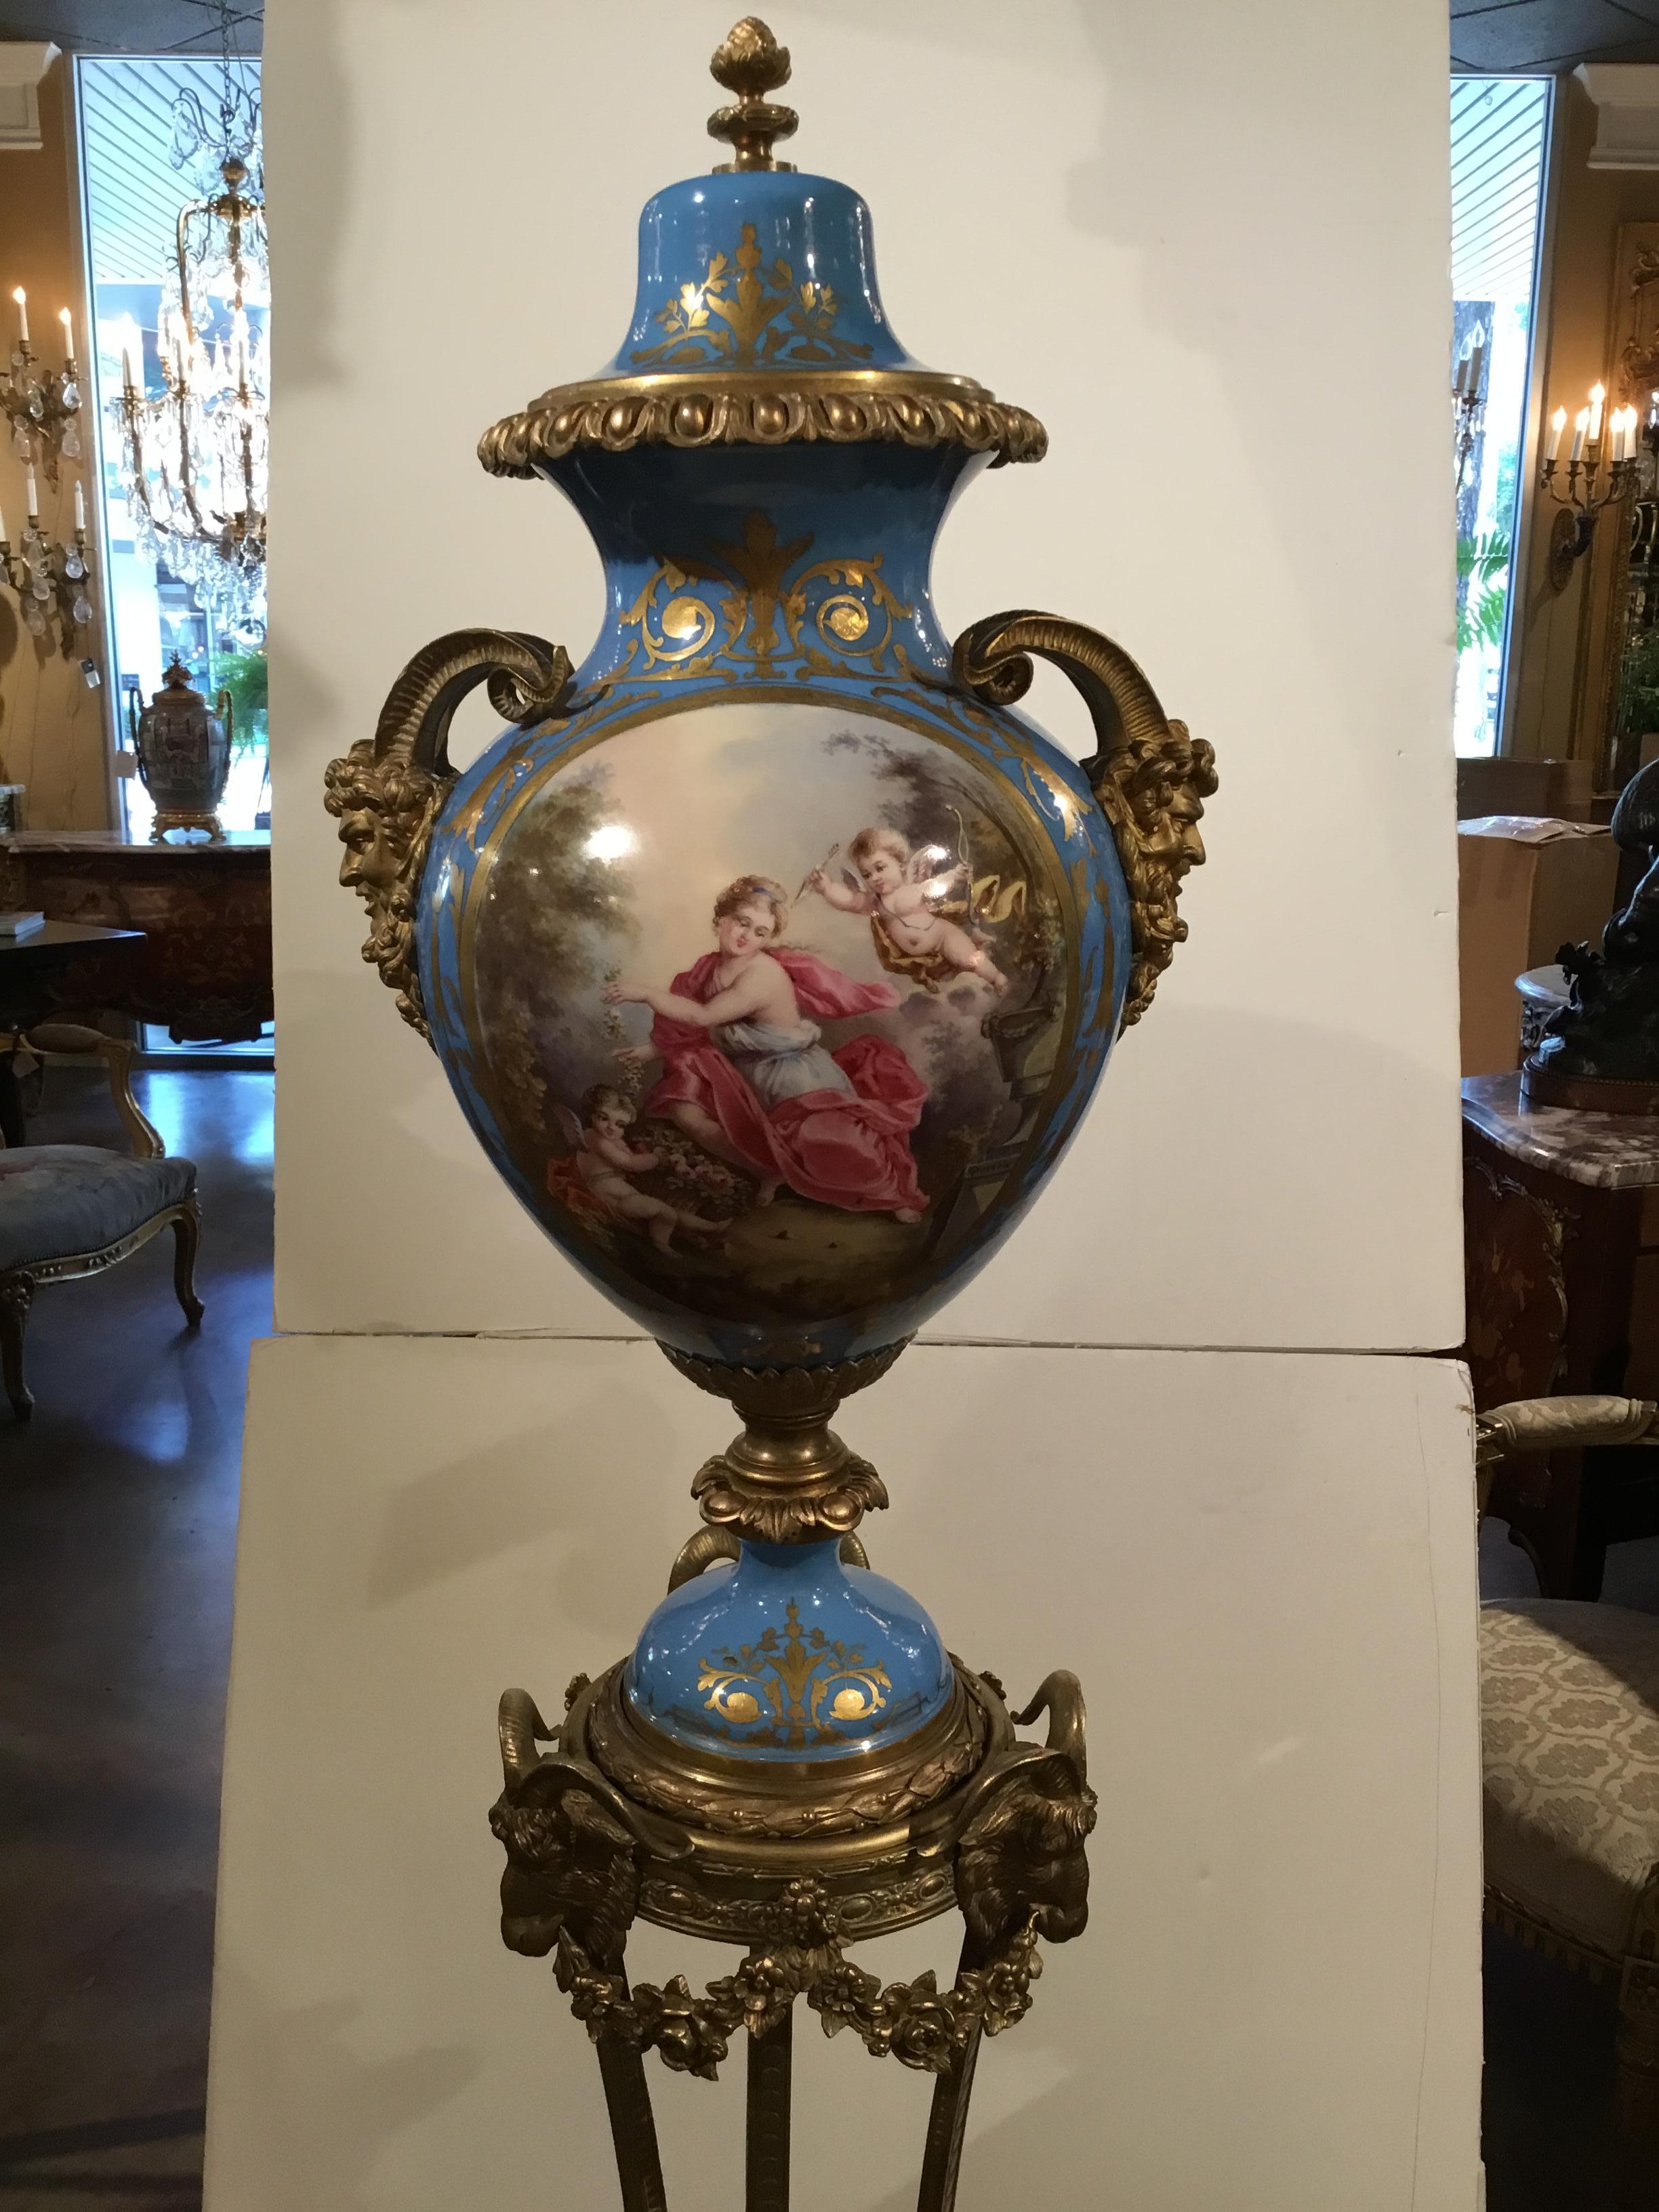 Sevres urn with French garden scene hand painted on the front of the urn
And a French landscape painted on the verso. Sevres mark is painted
Under glaze in the cap of the urn. It is mounted in a bronze doré pedestal
With rams heads mounted on the